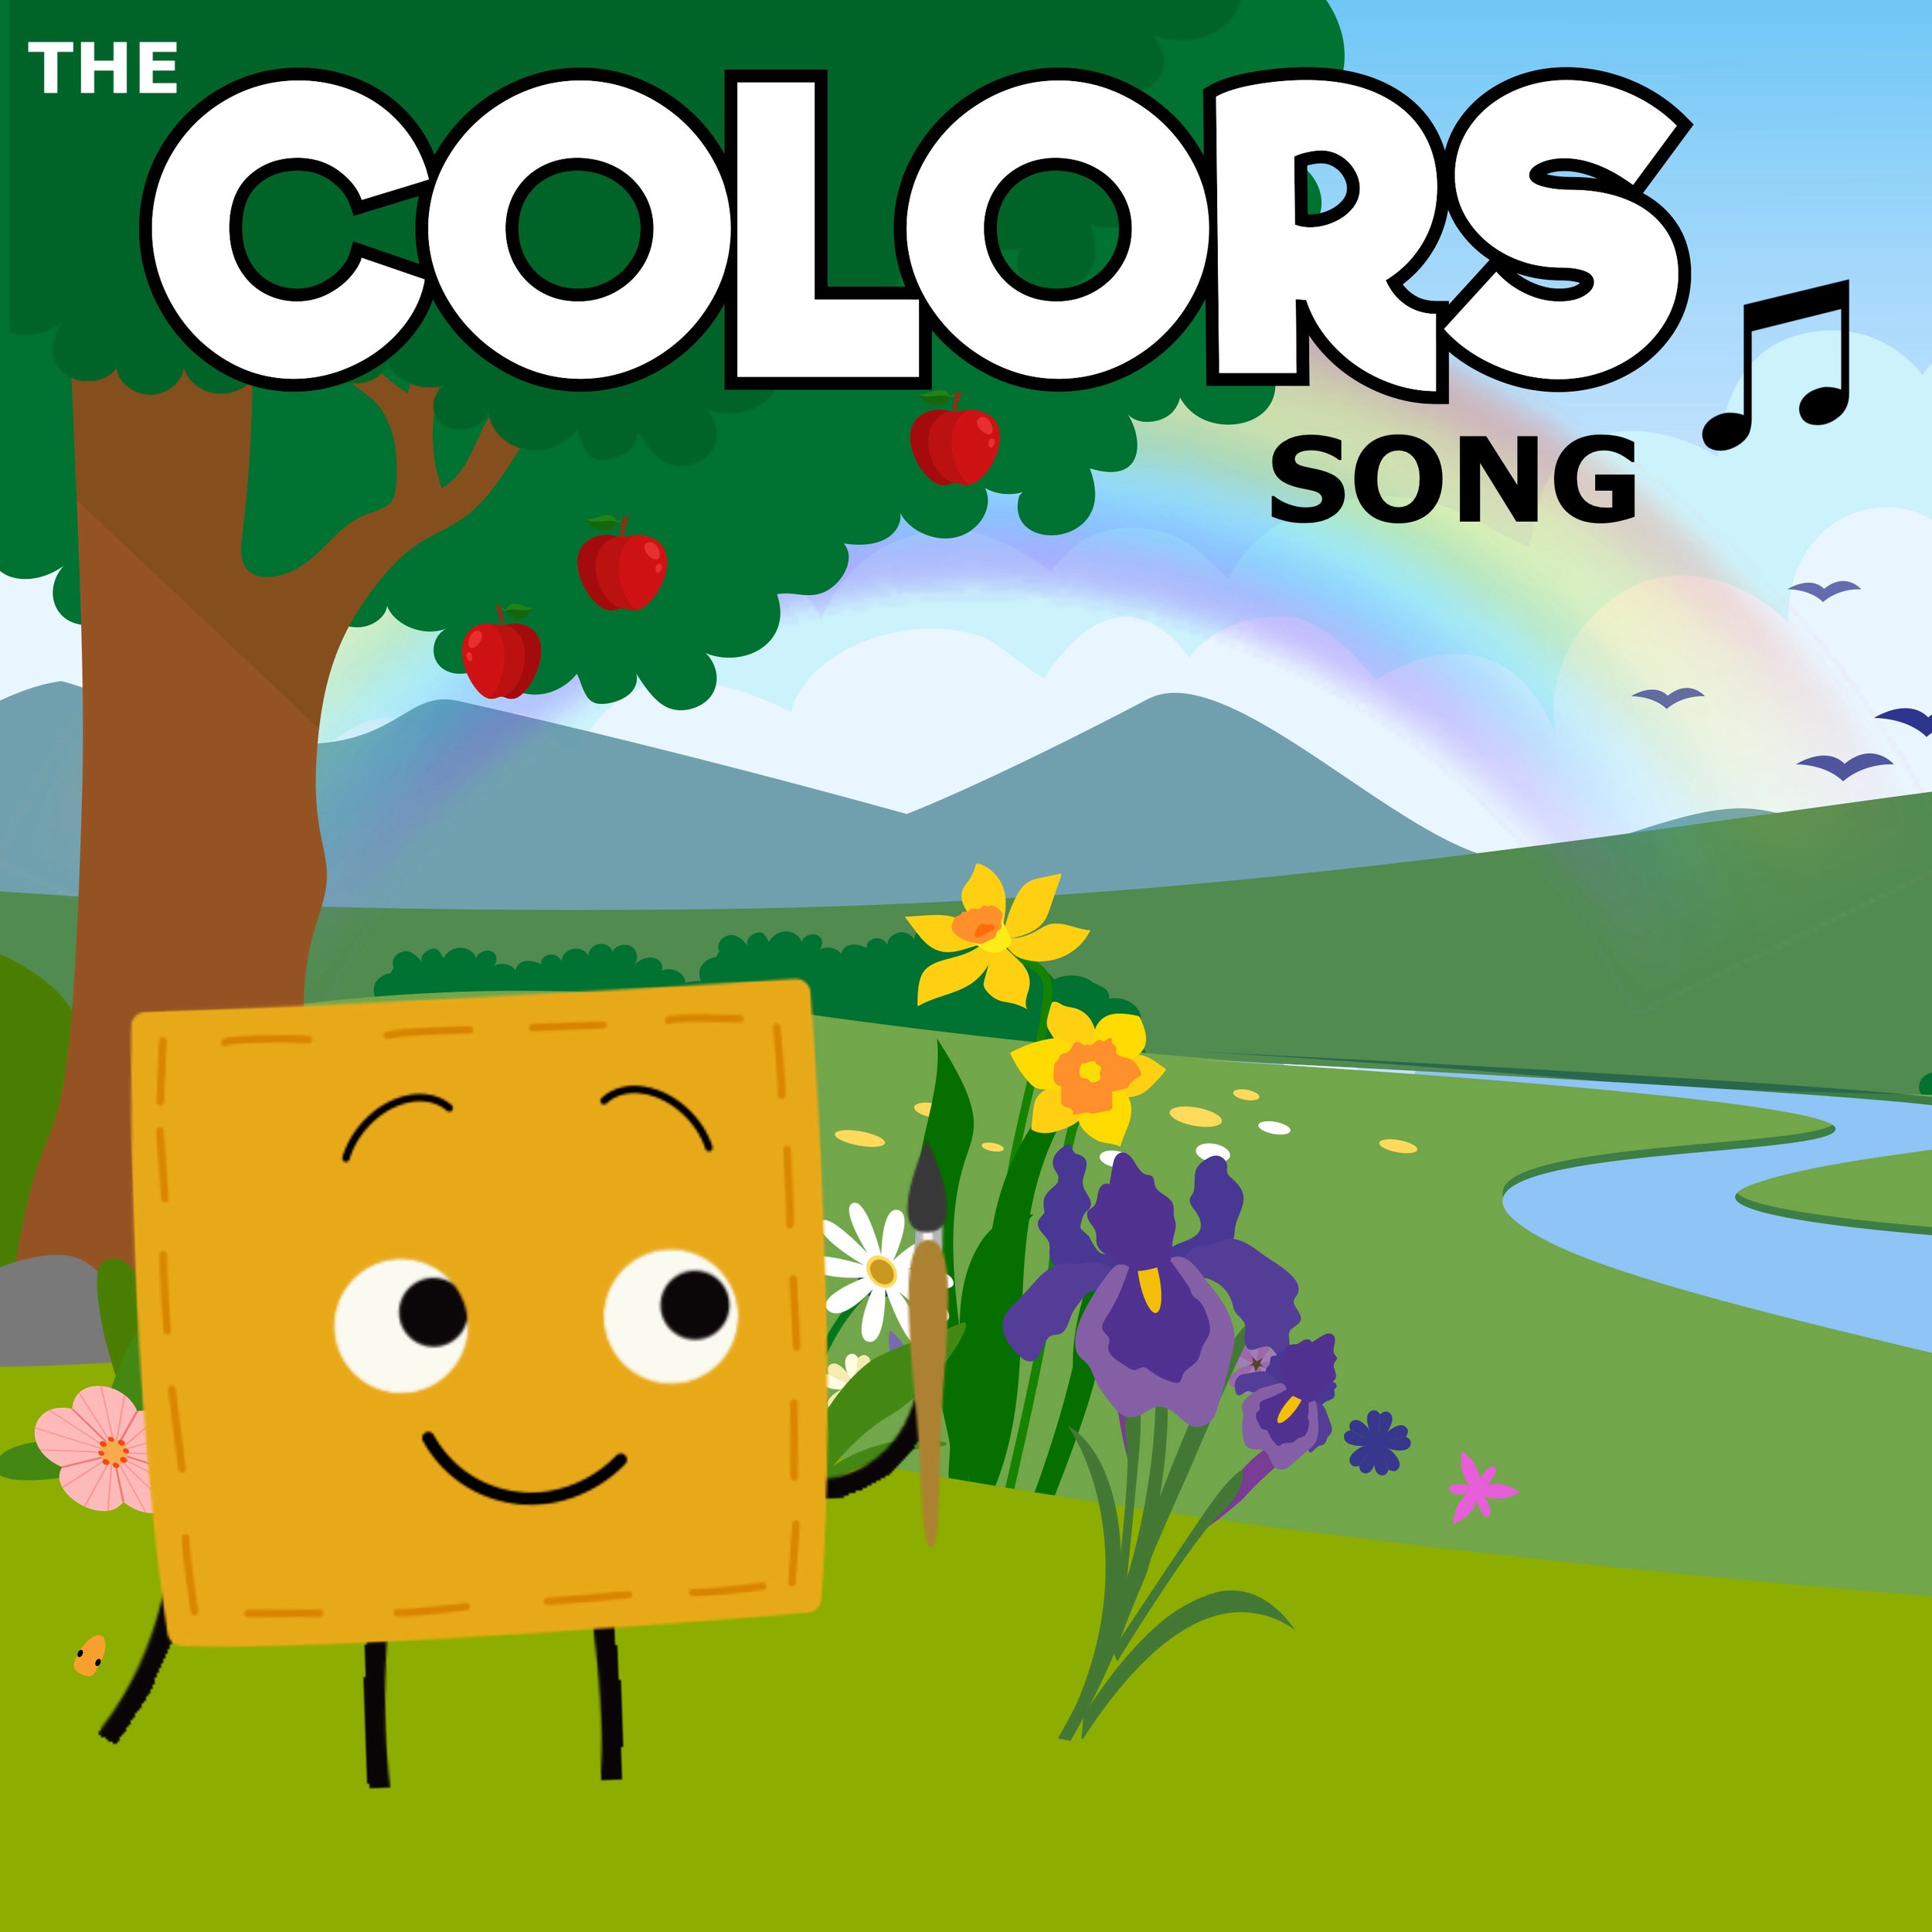 Red's Song - song and lyrics by Colourblocks